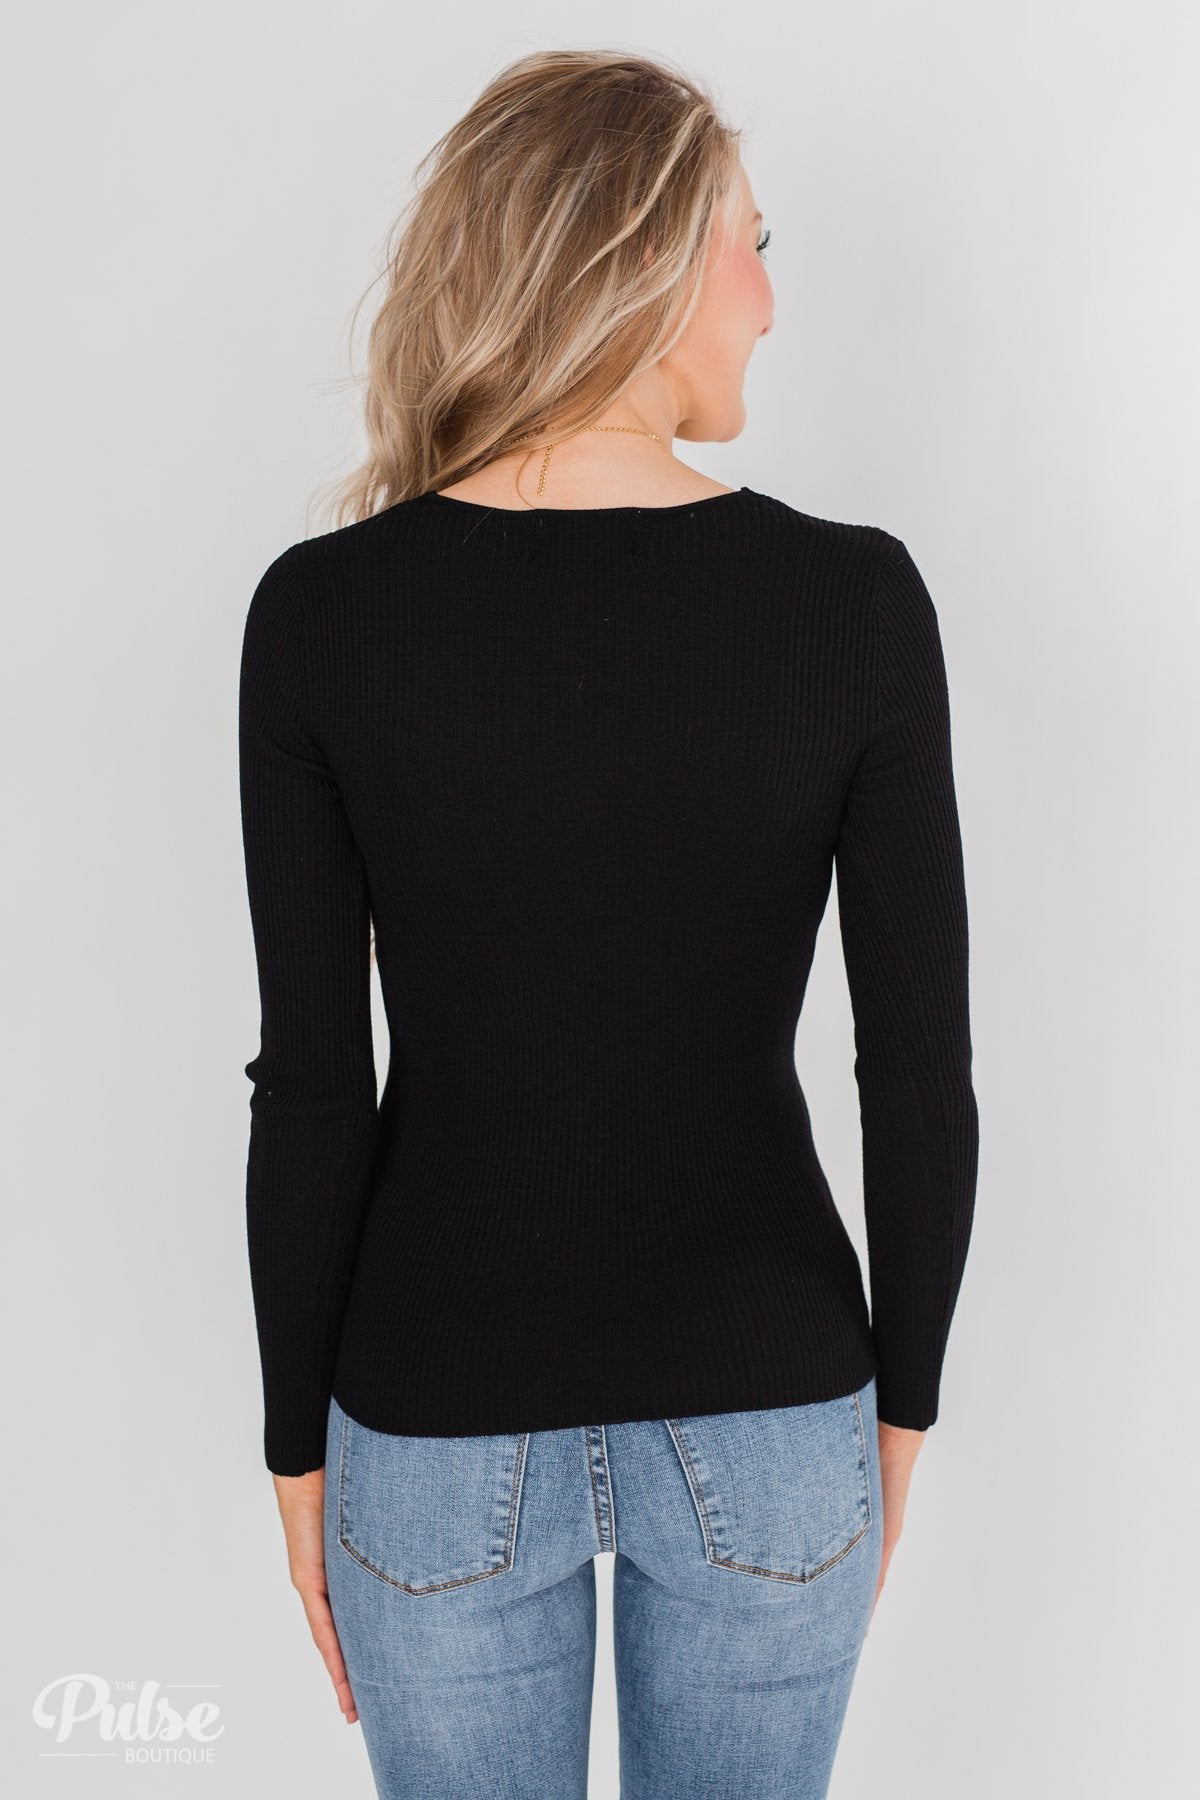 Fitted V-Neck Long Sleeve Top - Black – The Pulse Boutique